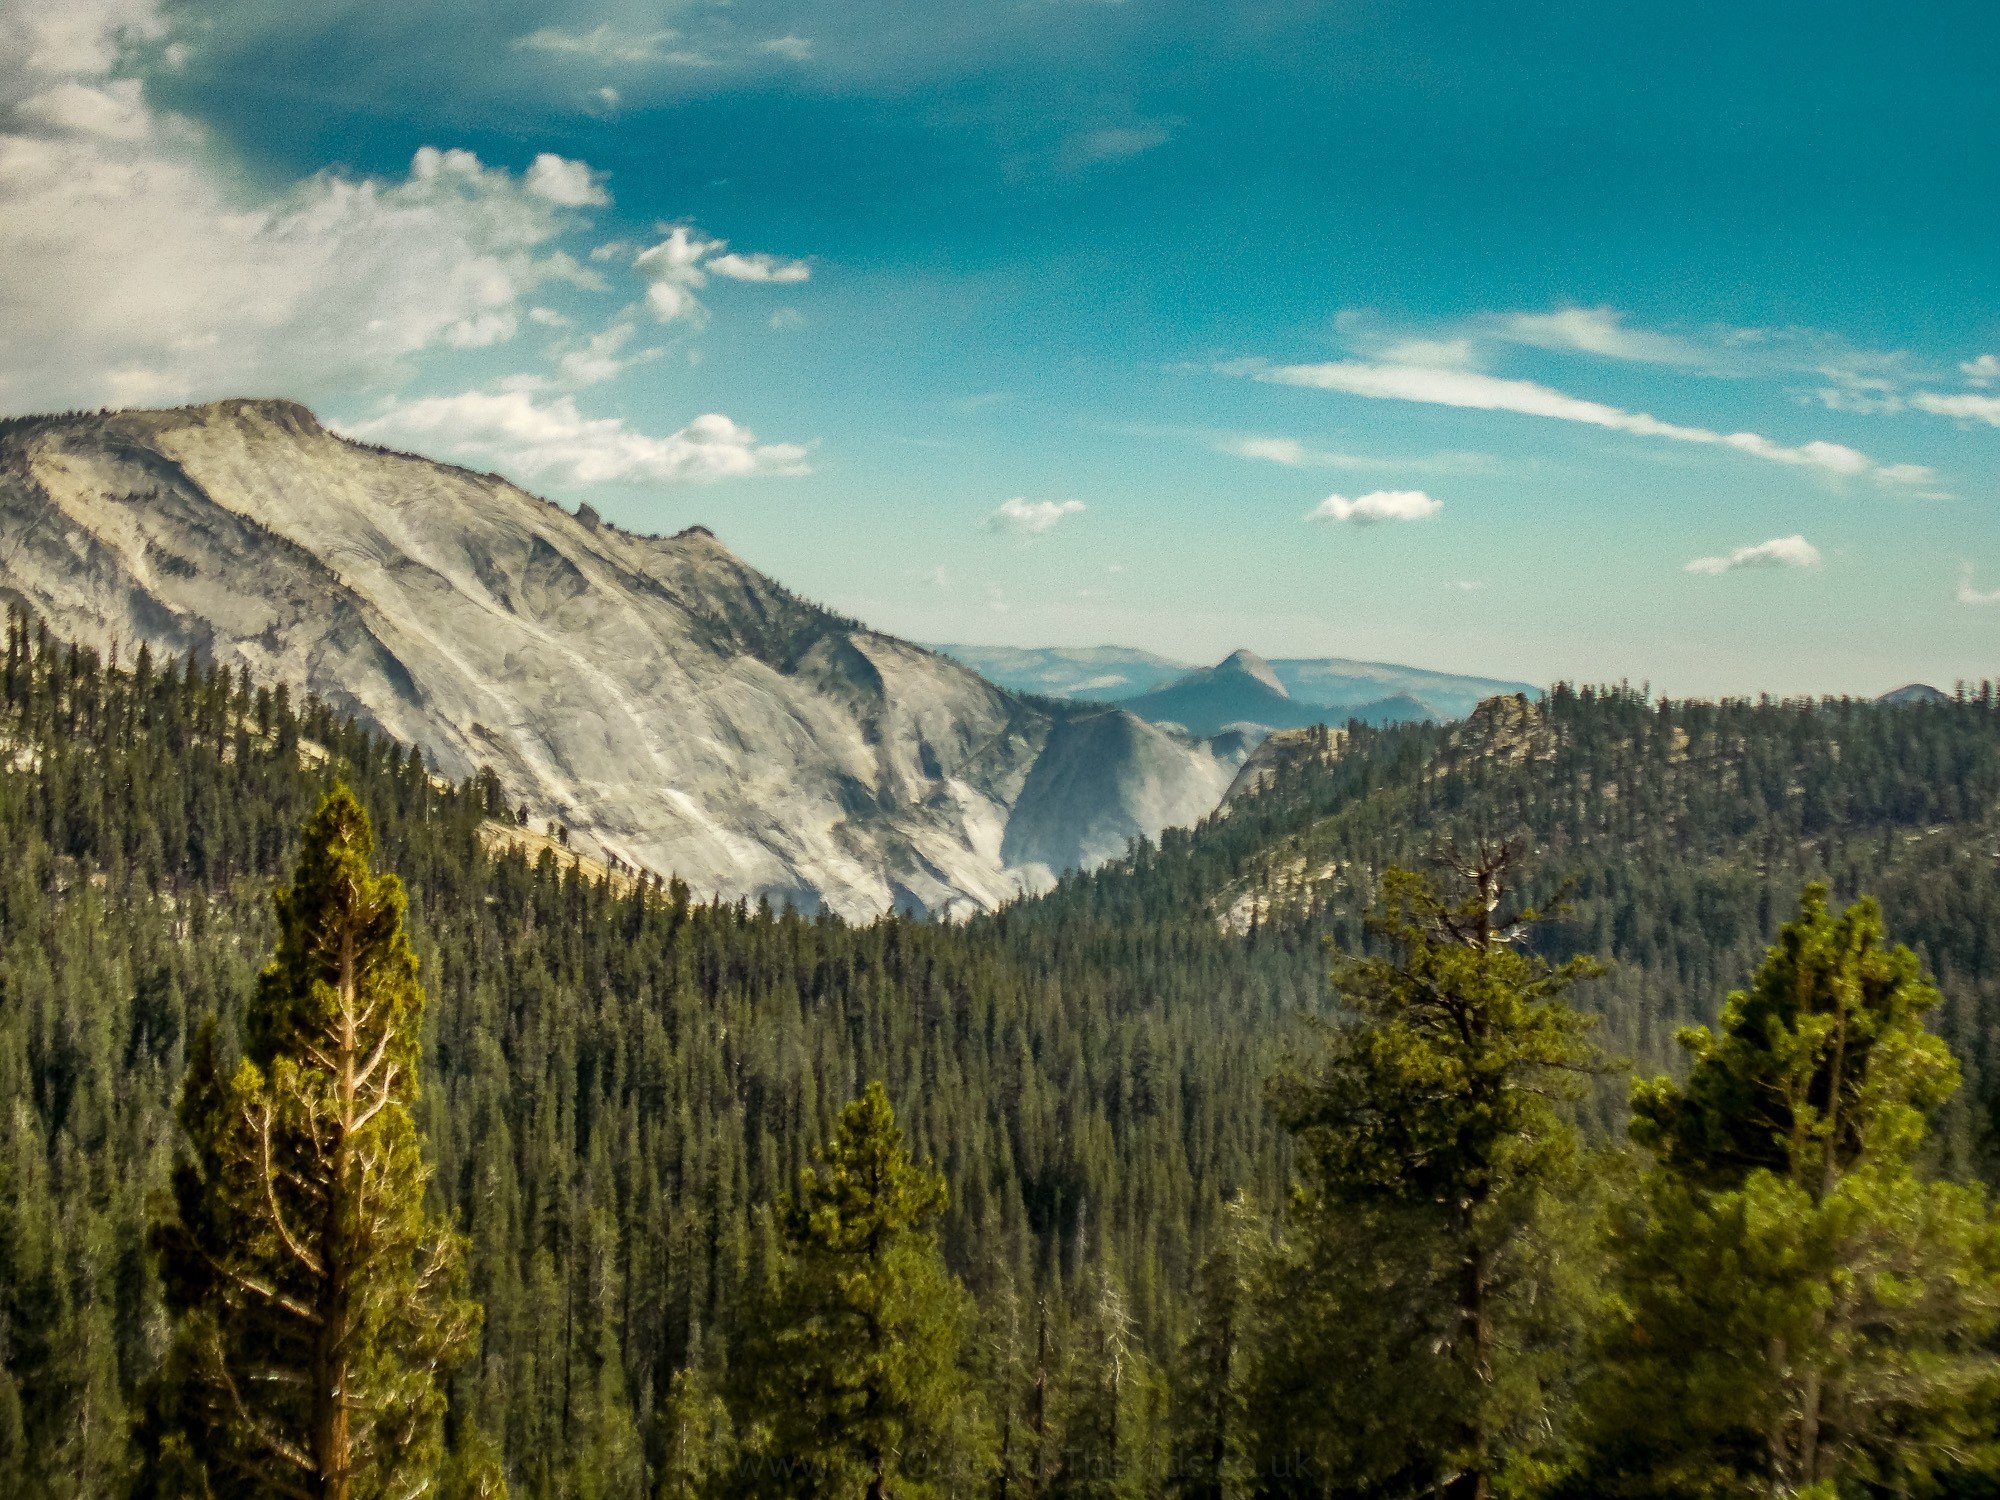 View of Half Dome from the Tioga Pass